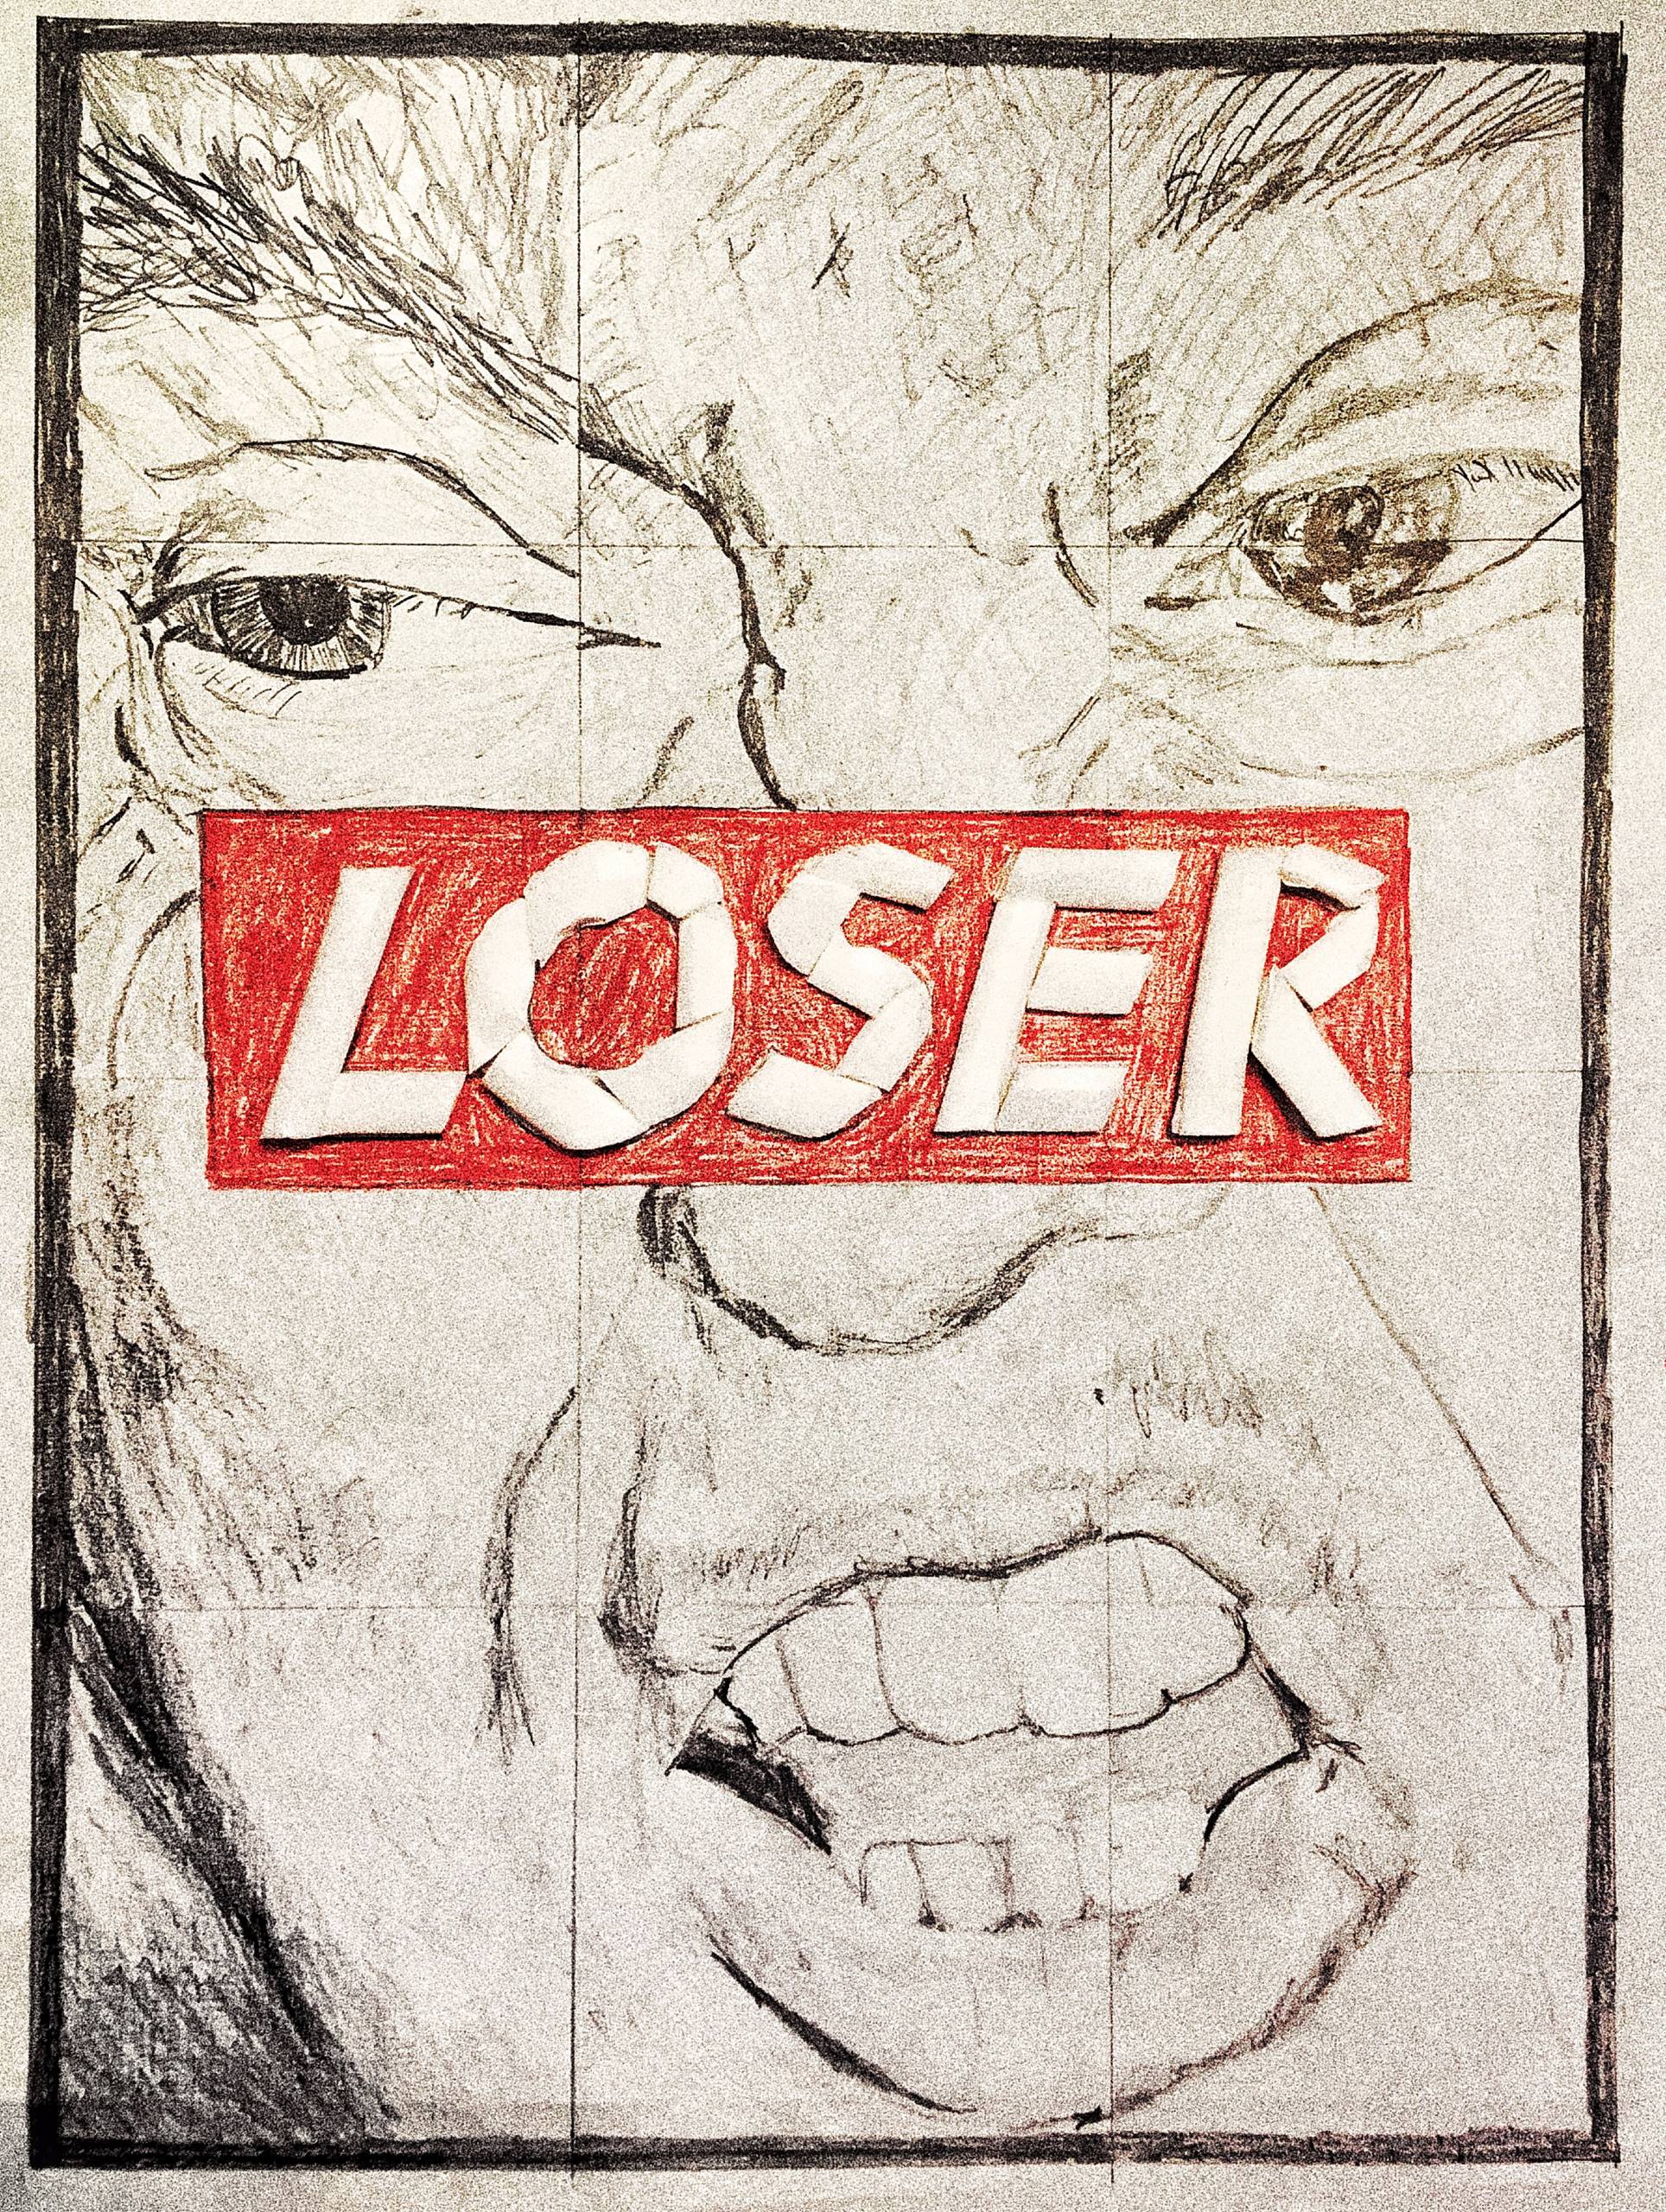 Close-up image of Donald Trumps face with white text on red block reading 'LOSER' over his nose